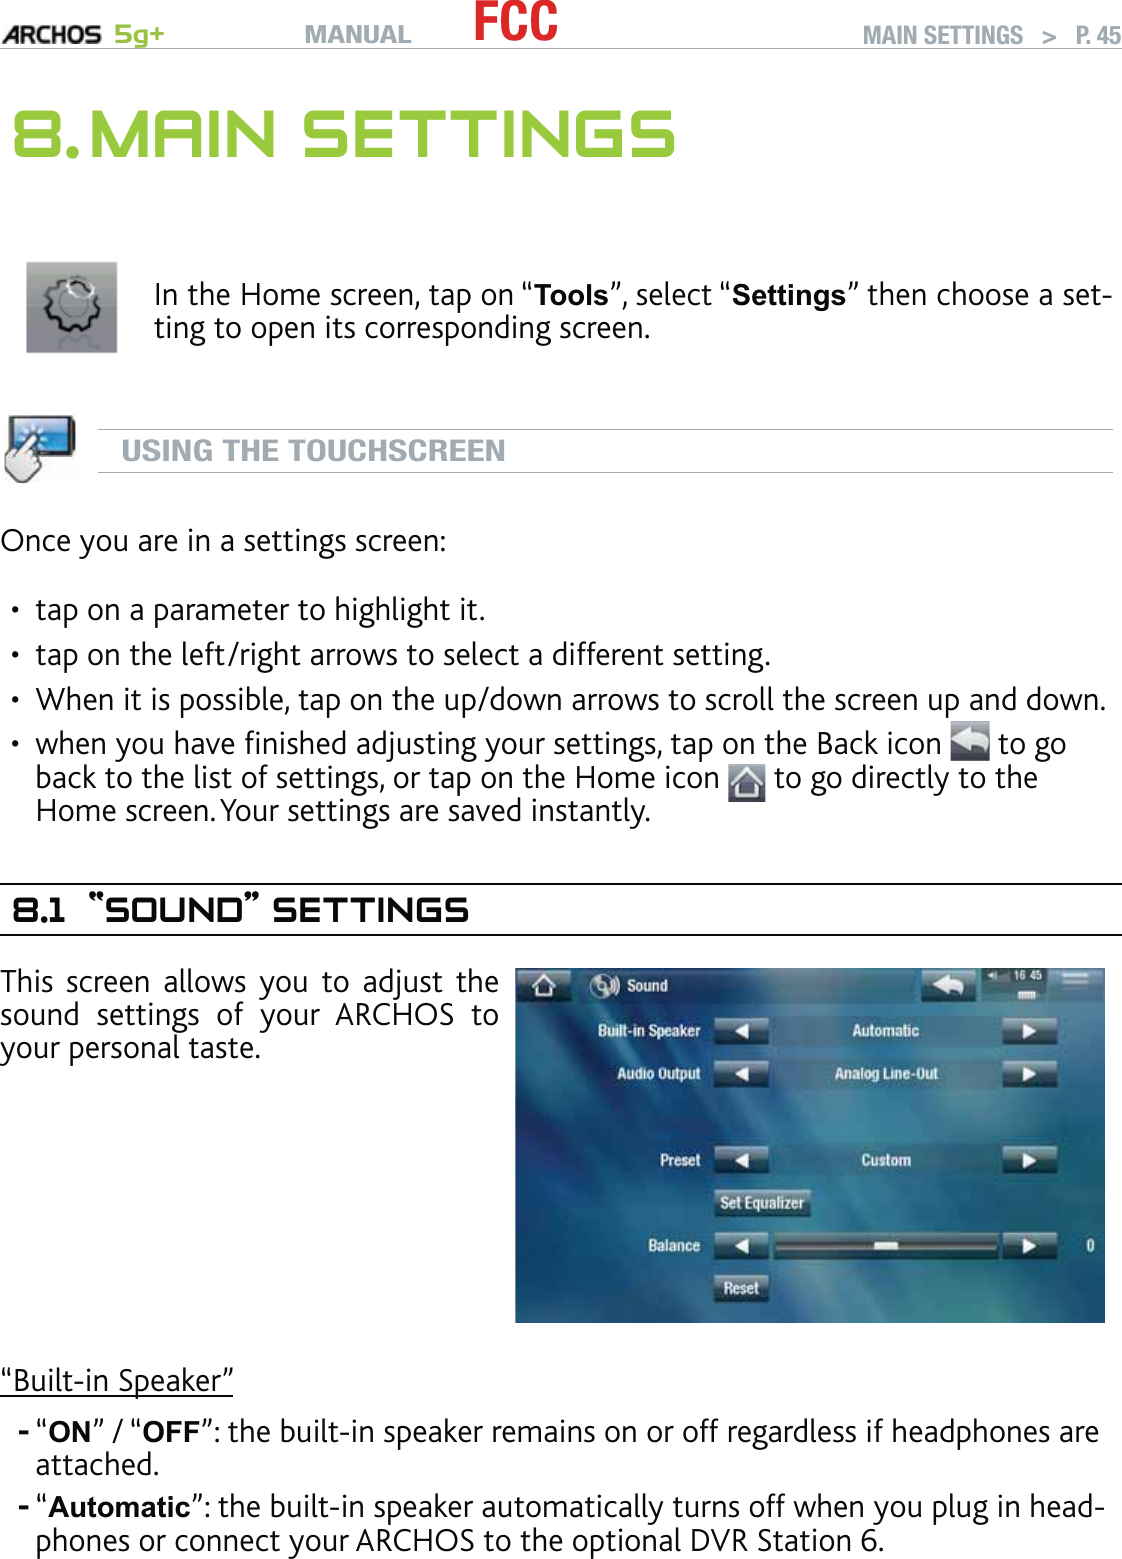 MANUAL 5g+ FCC MAIN SETTINGS   &gt;   P. 458. MAIN SETTINGSIn the Home screen, tap on “Tools”, select “Settings” then choose a set-ting to open its corresponding screen.USING THE TOUCHSCREENOnce you are in a settings screen:tap on a parameter to highlight it.tap on the left/right arrows to select a different setting. When it is possible, tap on the up/down arrows to scroll the screen up and down.when you have ﬁnished adjusting your settings, tap on the Back icon   to go back to the list of settings, or tap on the Home icon   to go directly to the Home screen. Your settings are saved instantly.8.1 “SOUND” SETTINGSThis screen allows you to adjust the sound settings of your ARCHOS to your personal taste.“Built-in Speaker”“ON” / “OFF”: the built-in speaker remains on or off regardless if headphones are attached.“Automatic”: the built-in speaker automatically turns off when you plug in head-phones or connect your ARCHOS to the optional DVR Station 6.••••--